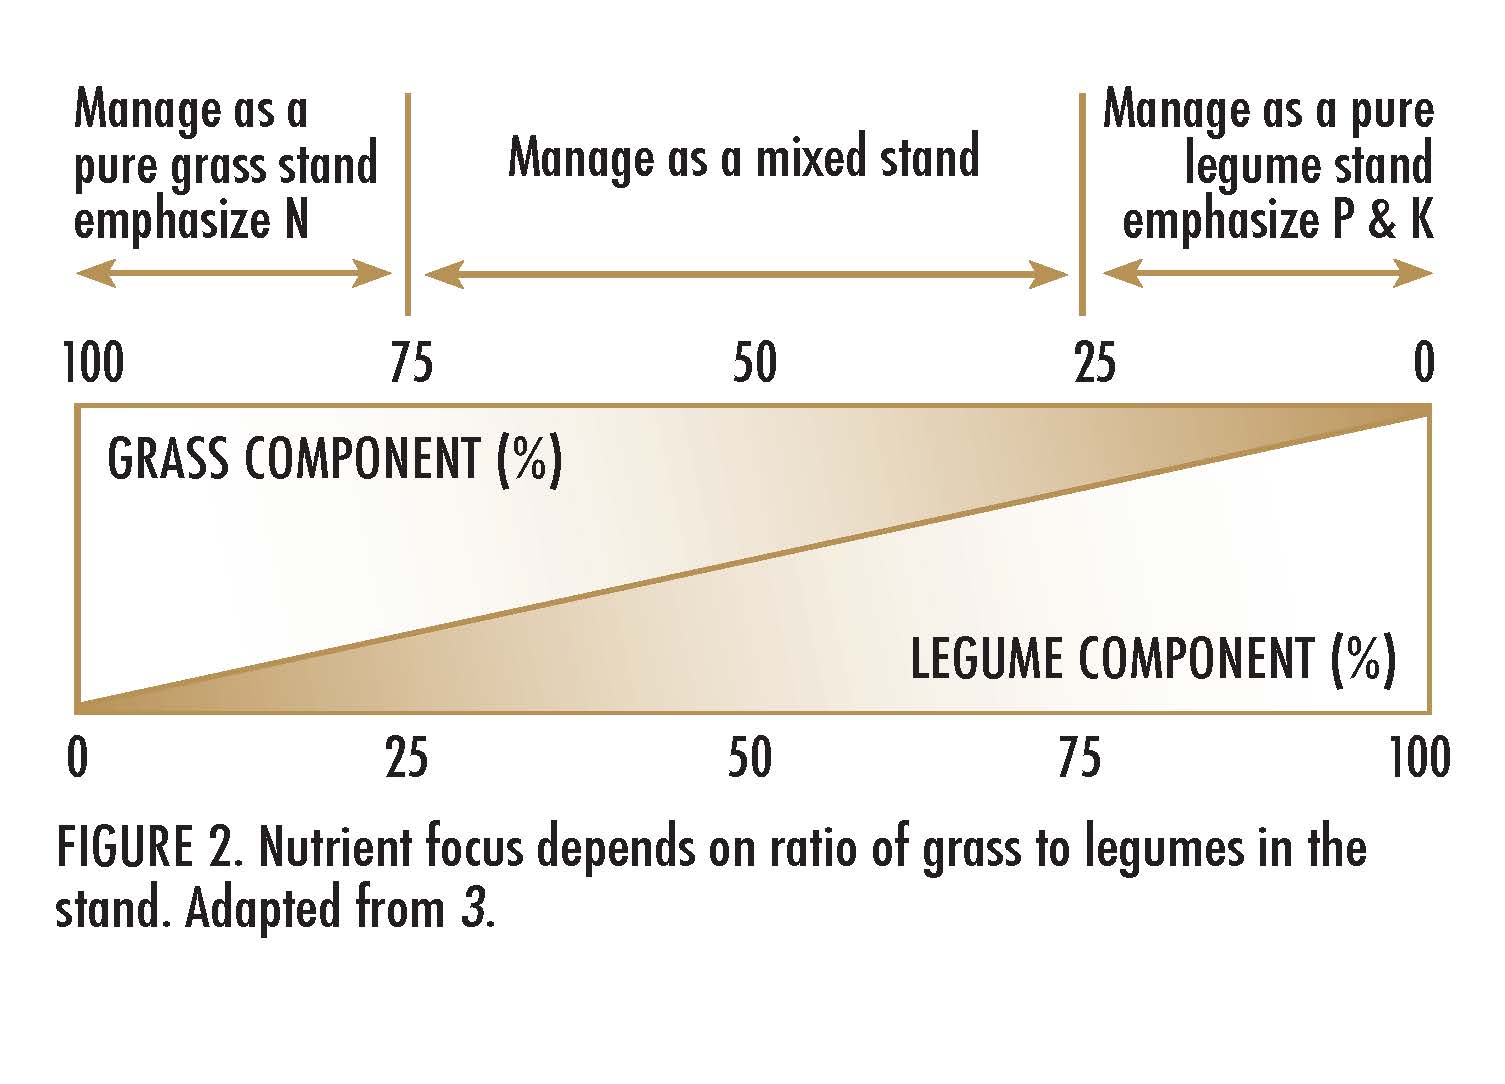 Figure 2. Nurtient docus depends on ratio of grass to legumes in the stand. Adapted from 3.